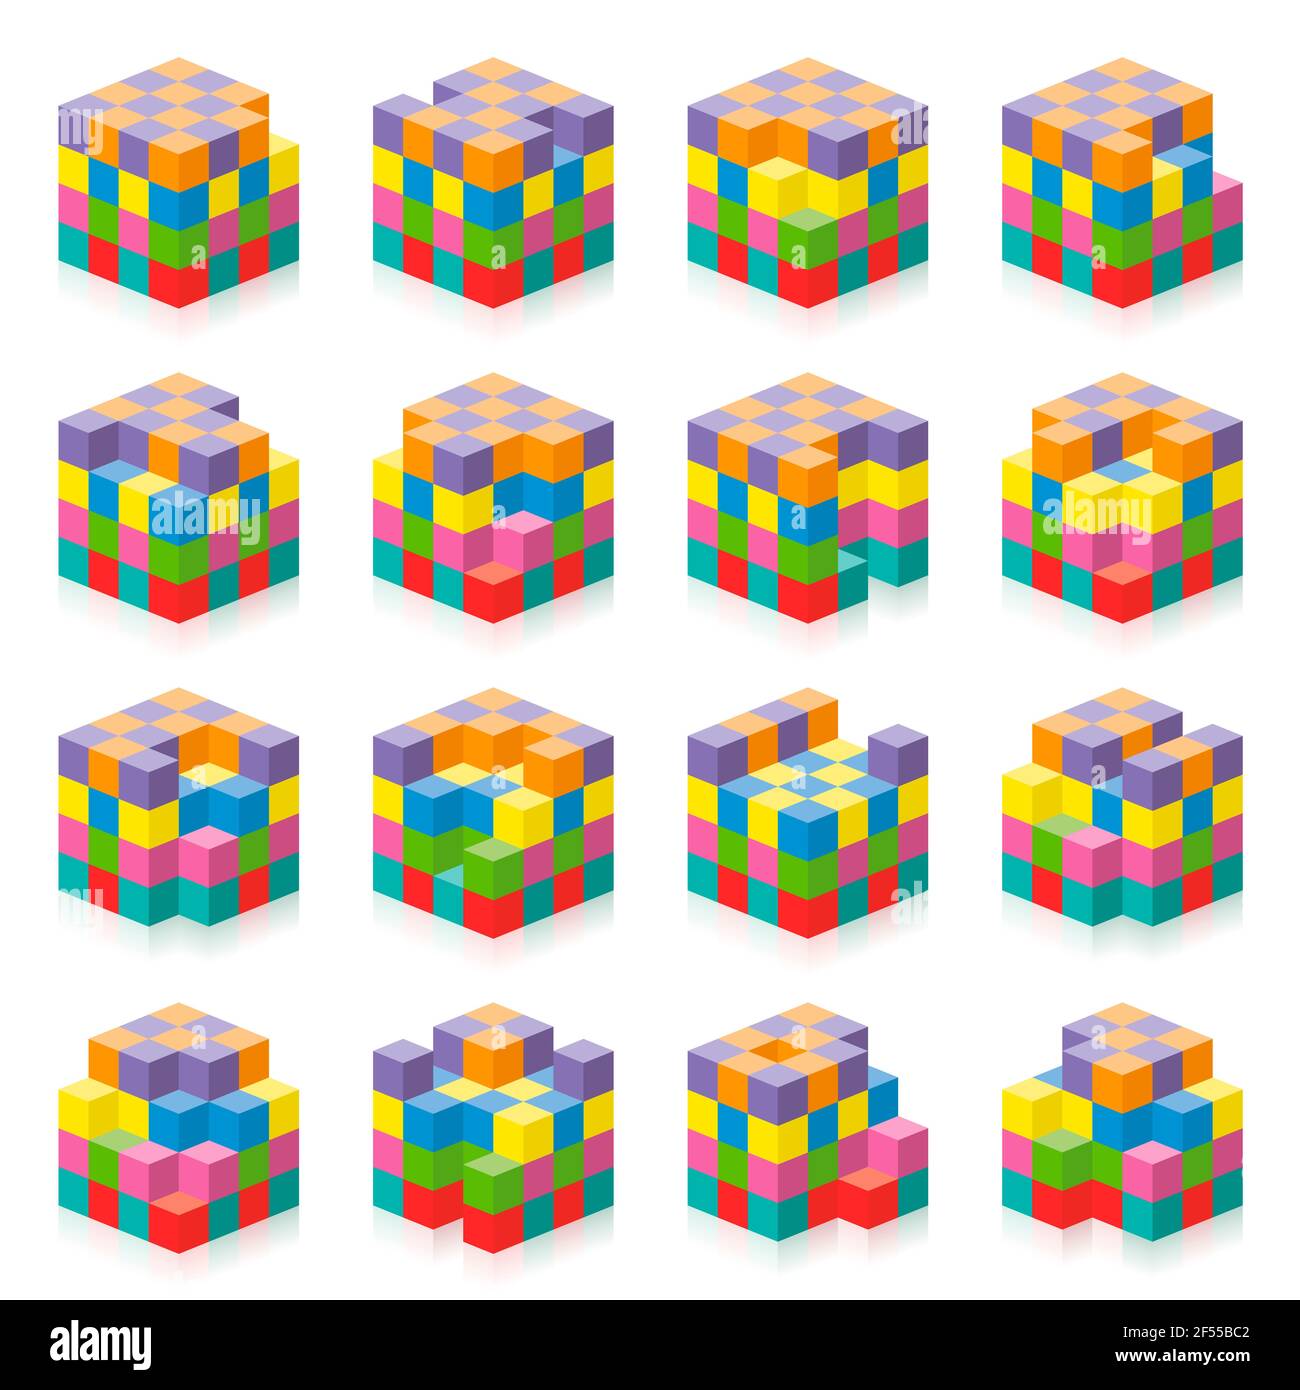 Cube with missing cubes from 1 to 16. Three-dimensional spatial perception exercise. Colorful game to count gaps, holes, blanks. Stock Photo